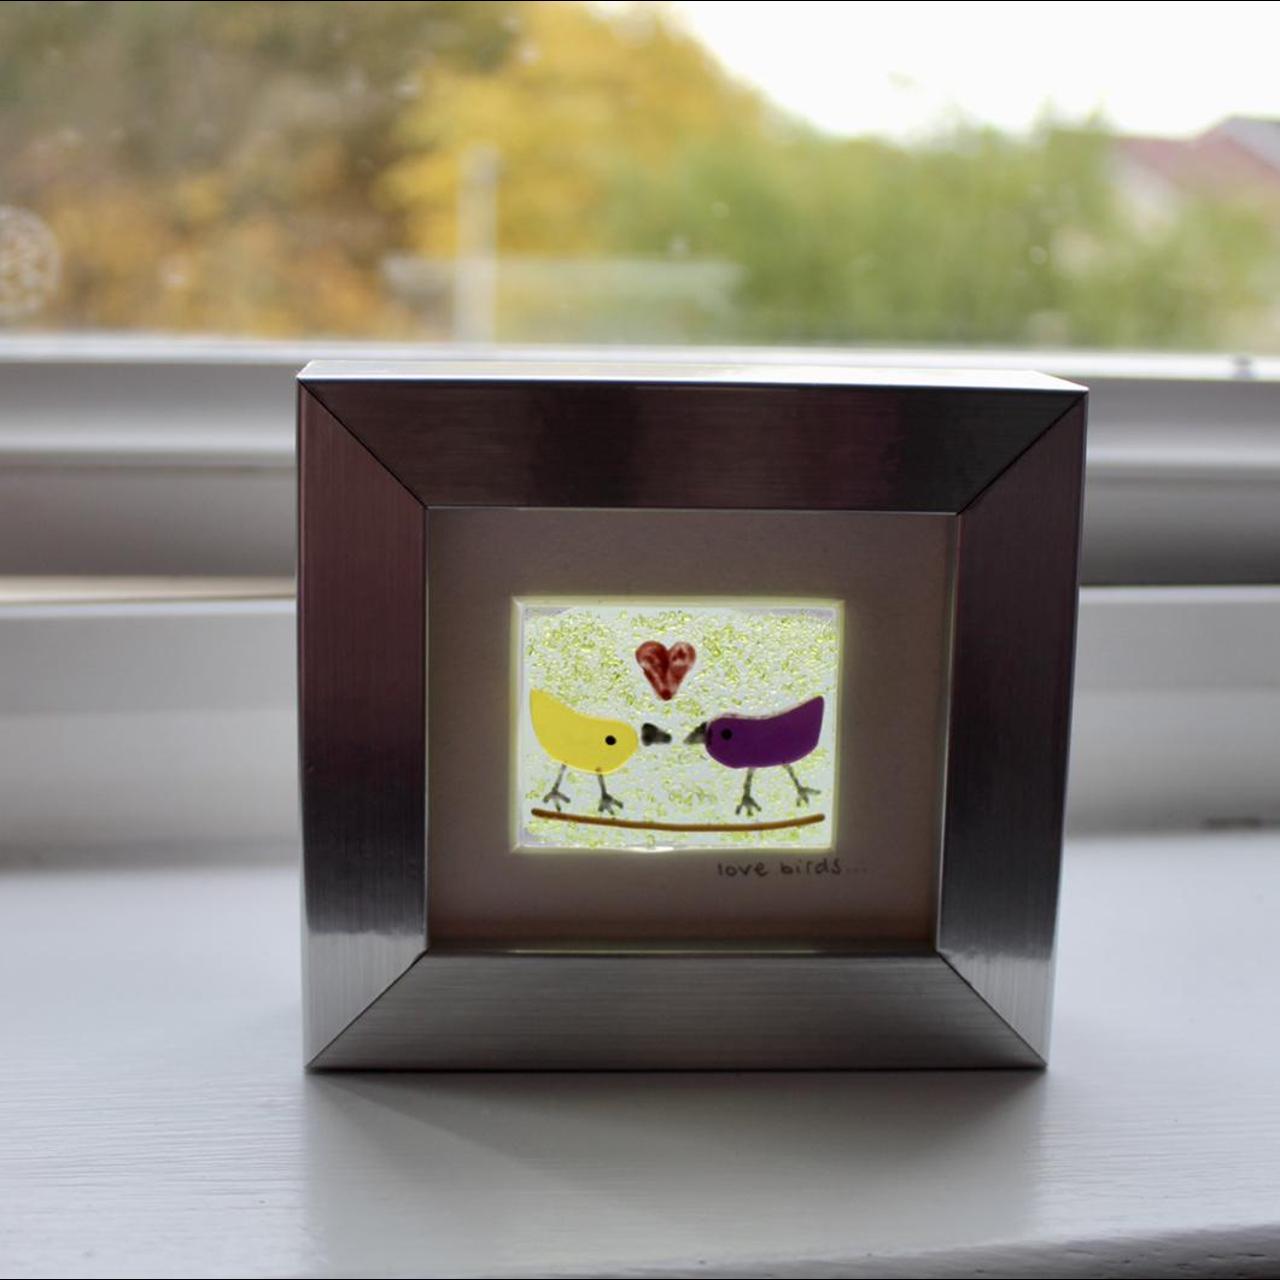 Product Image 2 - Small “Love Birds” stained glass